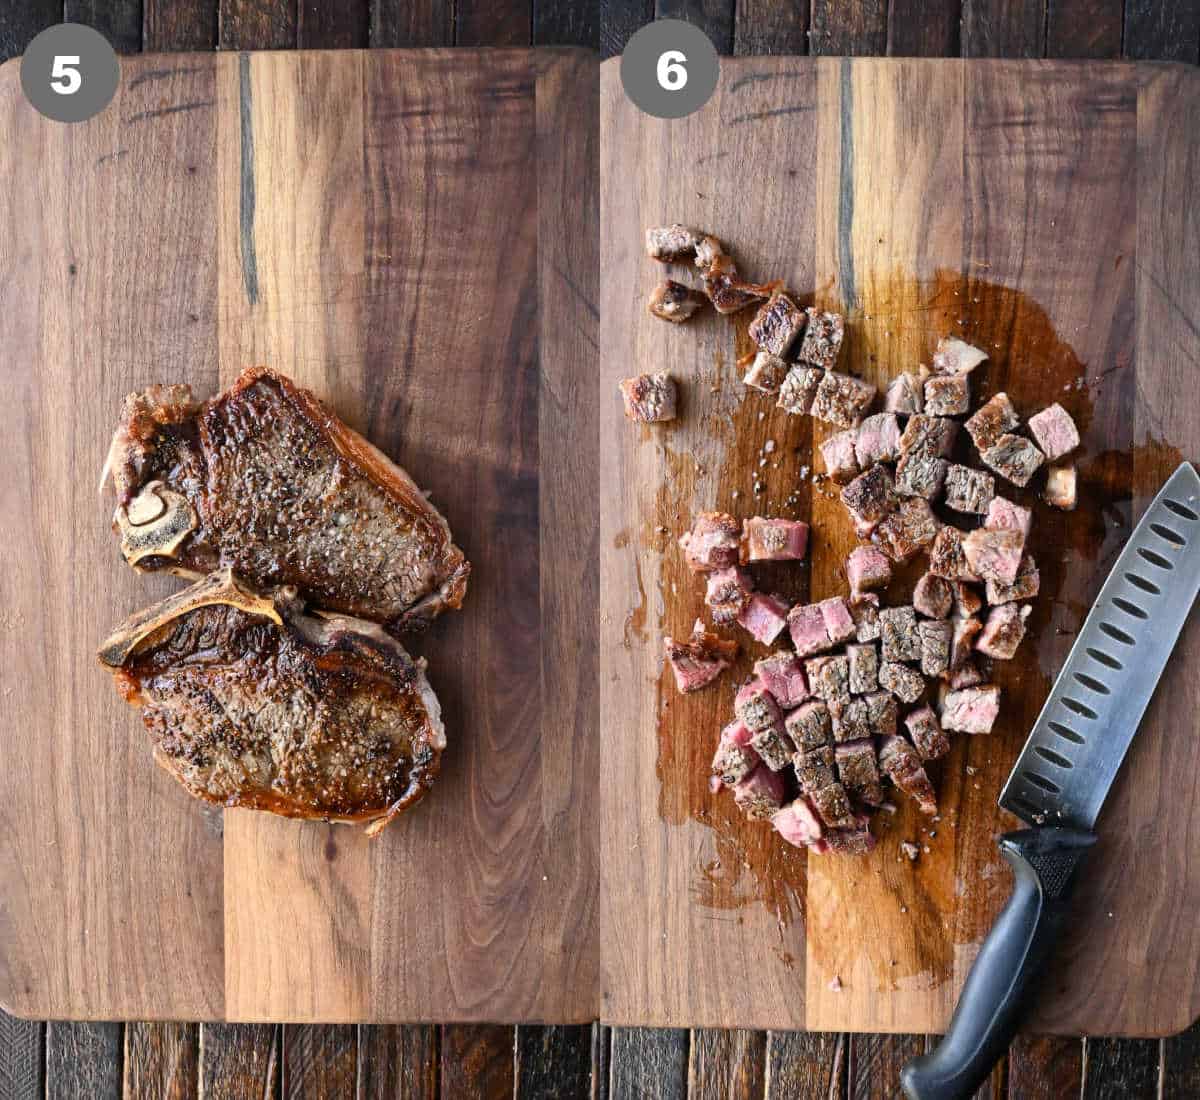 Steps 5 and 6 for making steak breakfast hash.